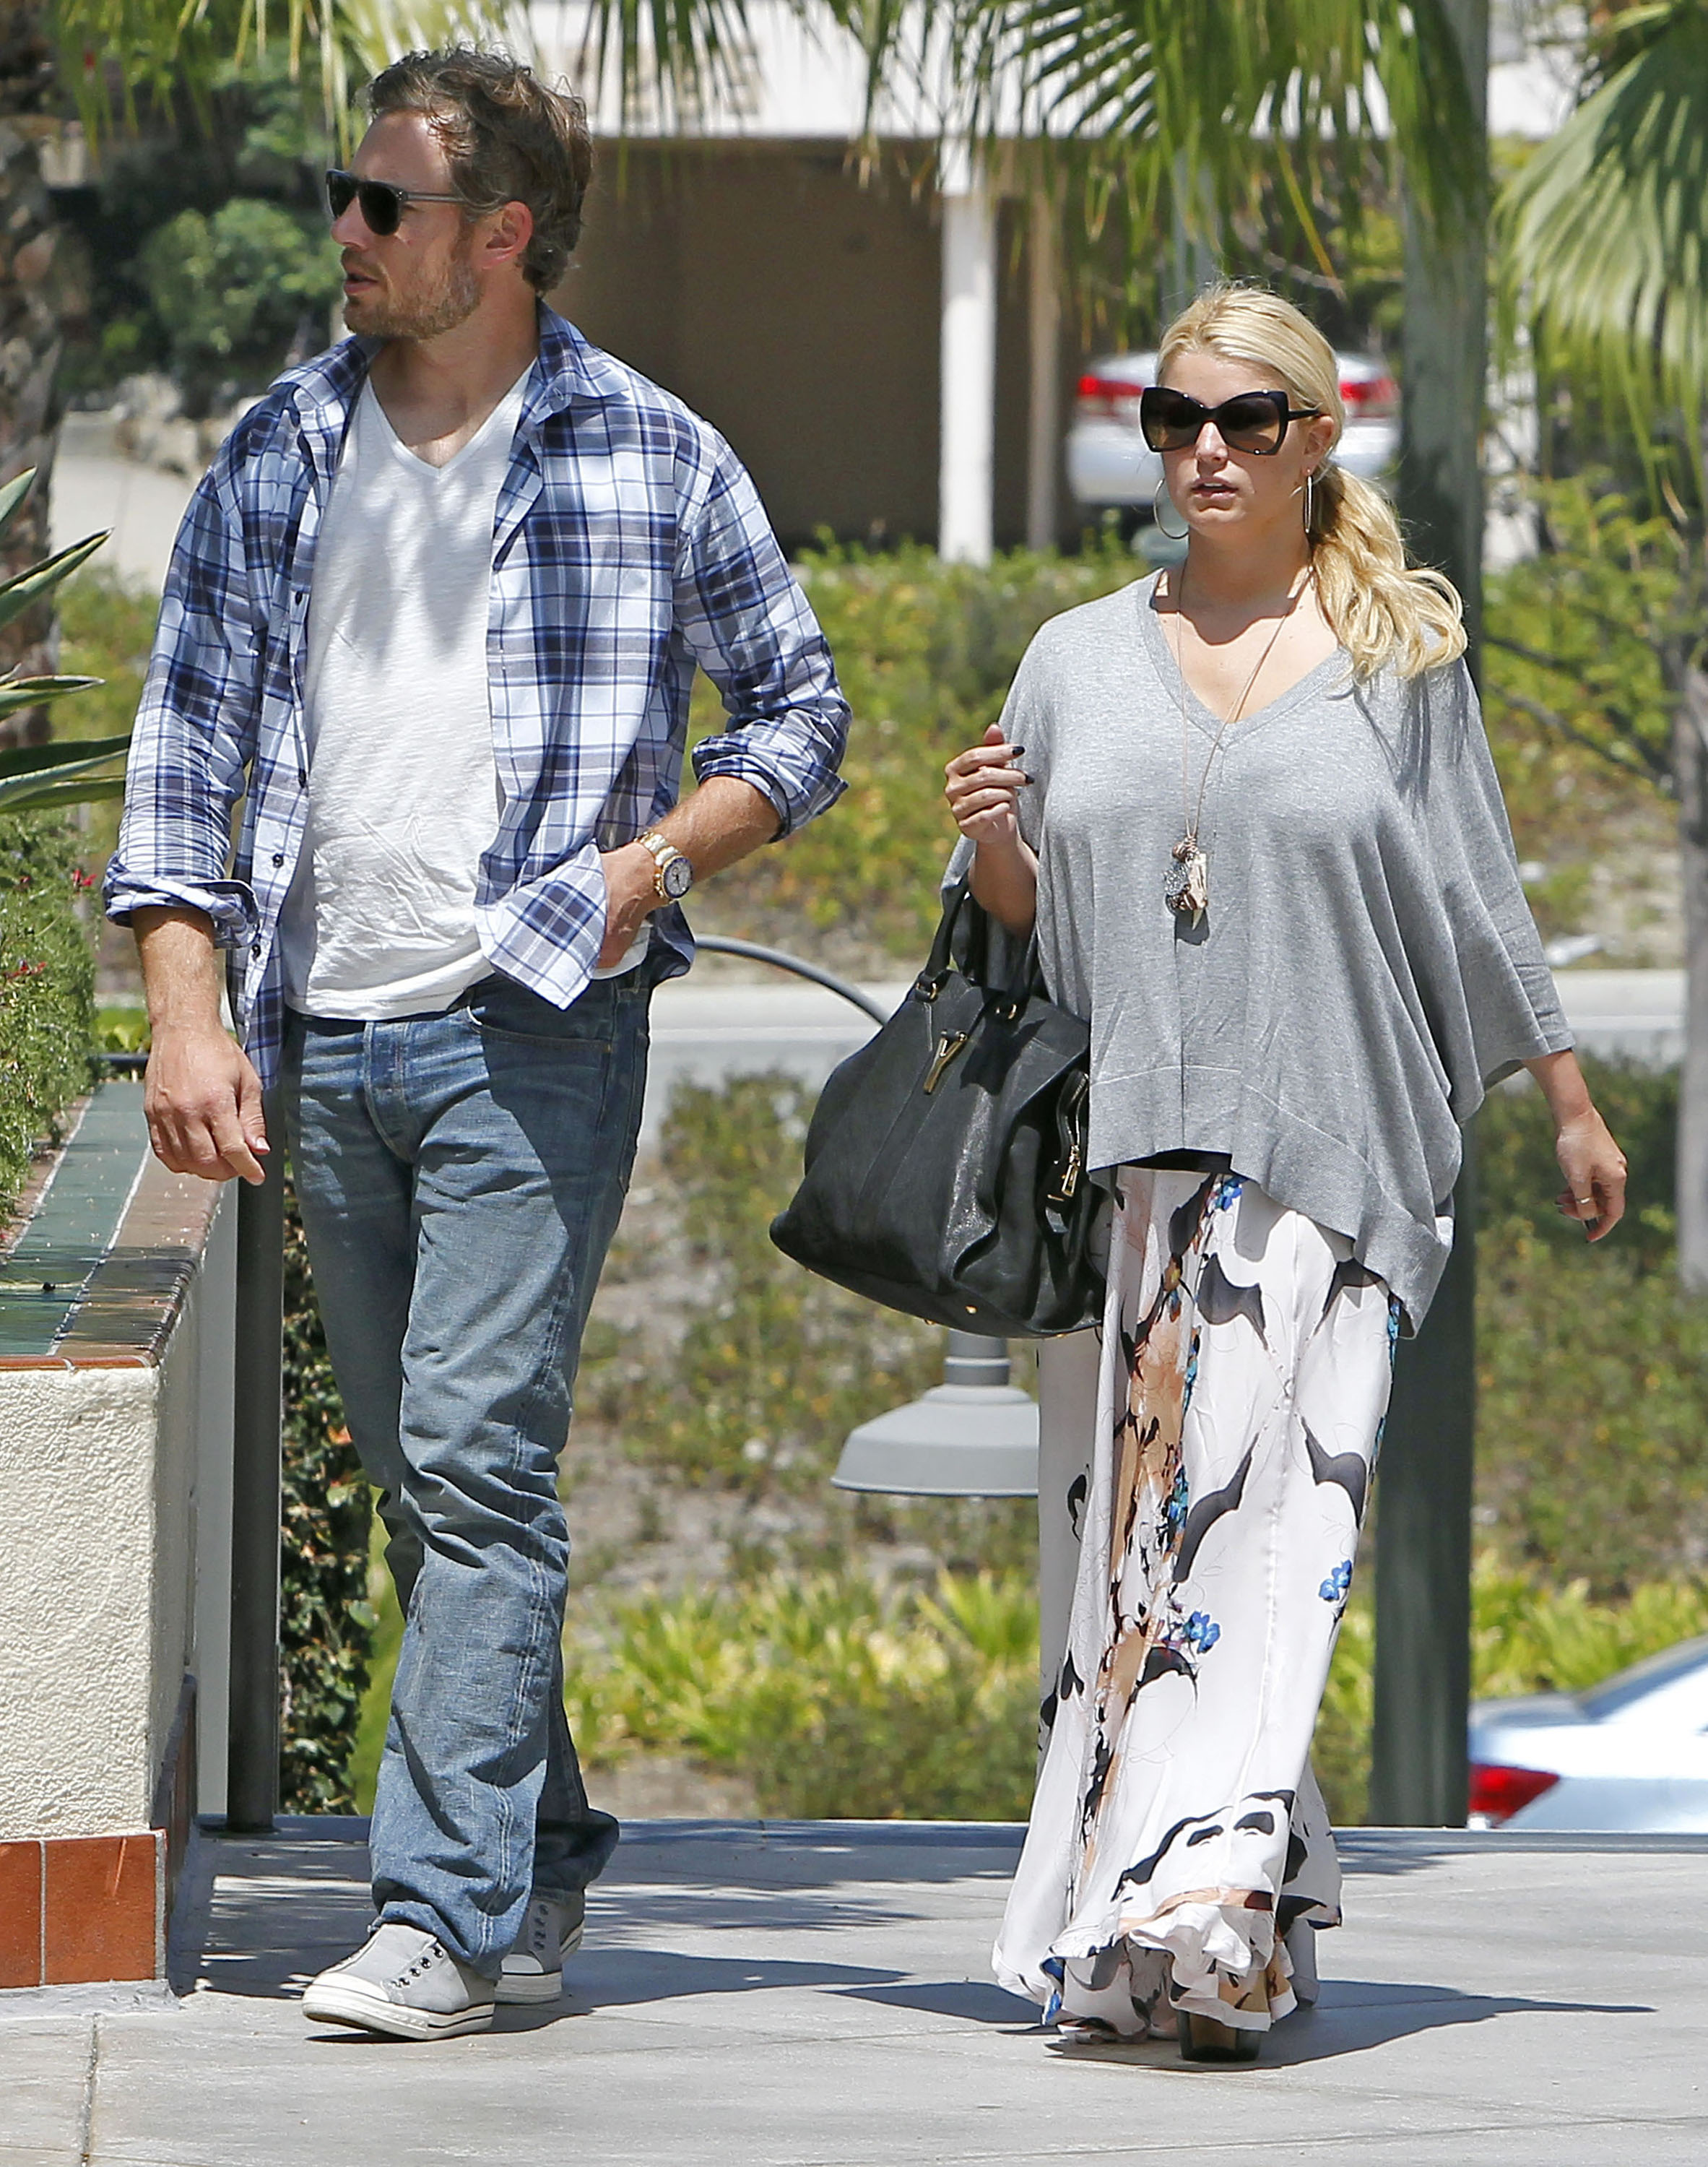 EXCLUSIVE: Jessica Simpson And Eric Johnson Out For Lunch And A Movie